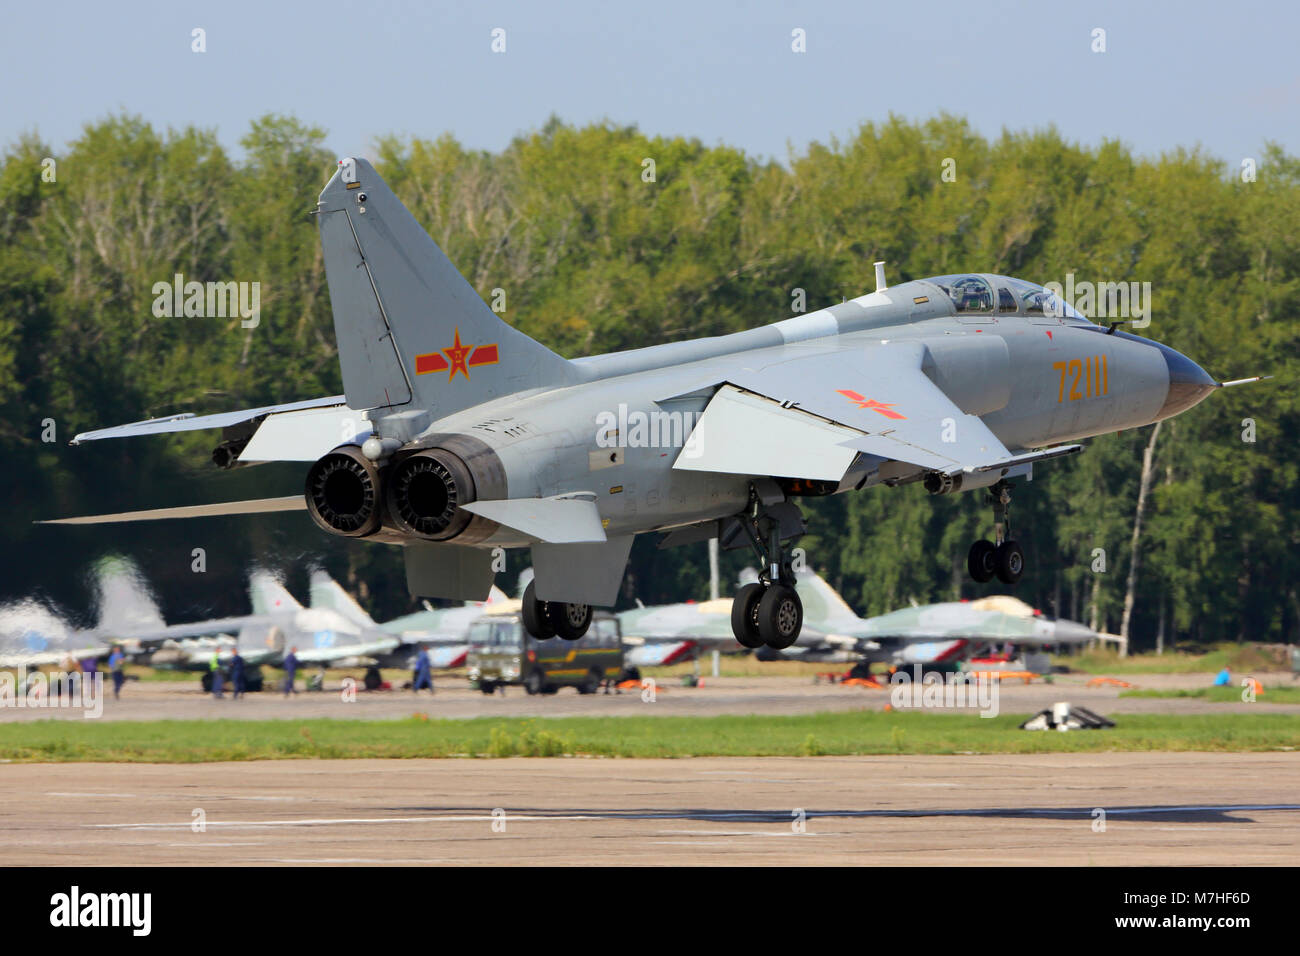 JH-7A FBC-1 Flying Leopard of Chinese Air Force. Stock Photo